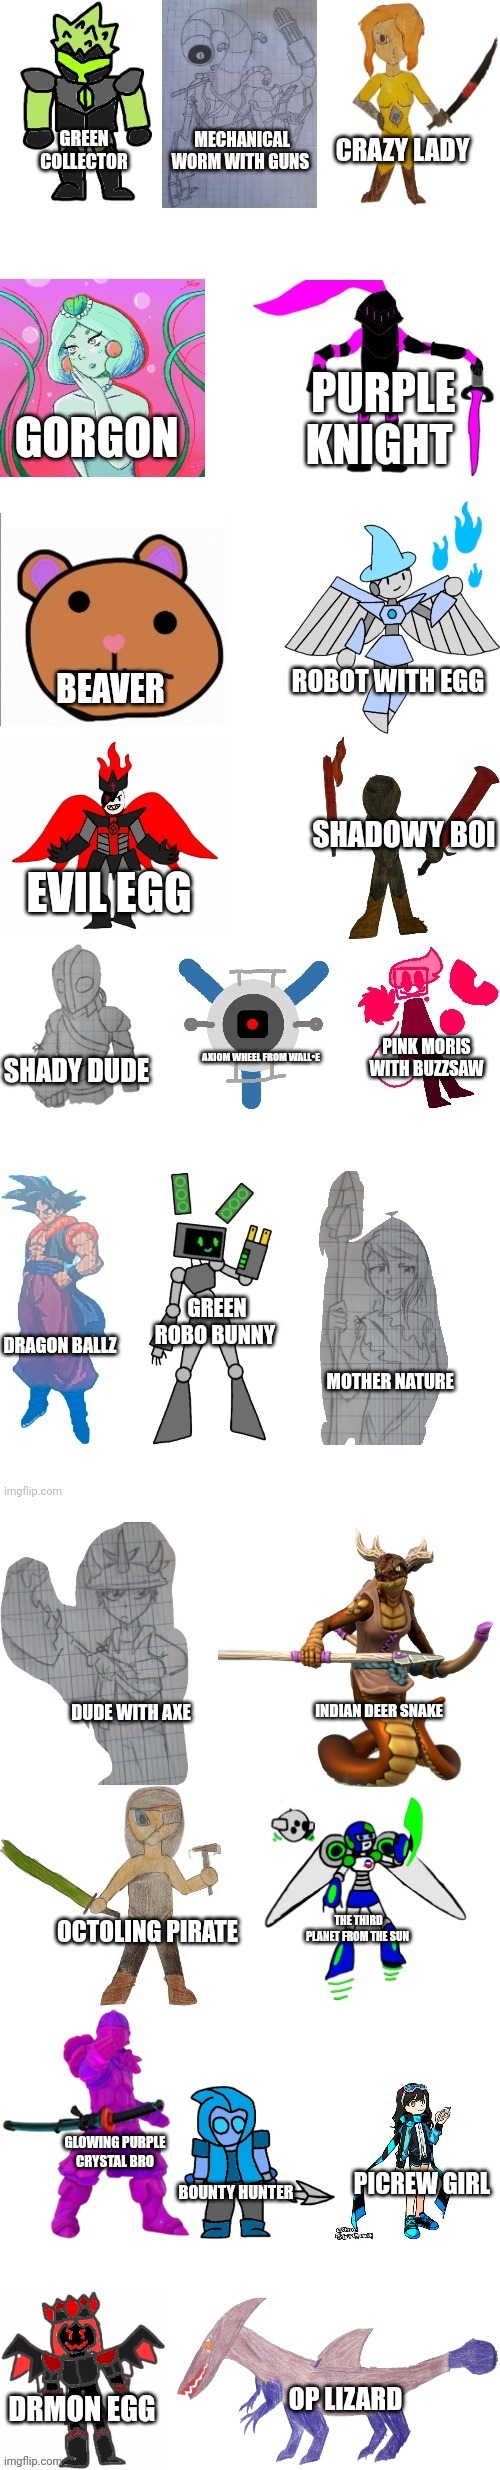 Bosses but blatantly honest  | CRAZY LADY; GREEN COLLECTOR; MECHANICAL WORM WITH GUNS; PURPLE KNIGHT; GORGON; ROBOT WITH EGG; BEAVER; SHADOWY BOI; EVIL EGG; PINK MORIS WITH BUZZSAW; AXIOM WHEEL FROM WALL•E; SHADY DUDE; GREEN ROBO BUNNY; DRAGON BALLZ; MOTHER NATURE; INDIAN DEER SNAKE; DUDE WITH AXE; THE THIRD PLANET FROM THE SUN; OCTOLING PIRATE; GLOWING PURPLE CRYSTAL BRO; PICREW GIRL; BOUNTY HUNTER; DRMON EGG; OP LIZARD | image tagged in imgflip-bossfights oc list 8 0 | made w/ Imgflip meme maker